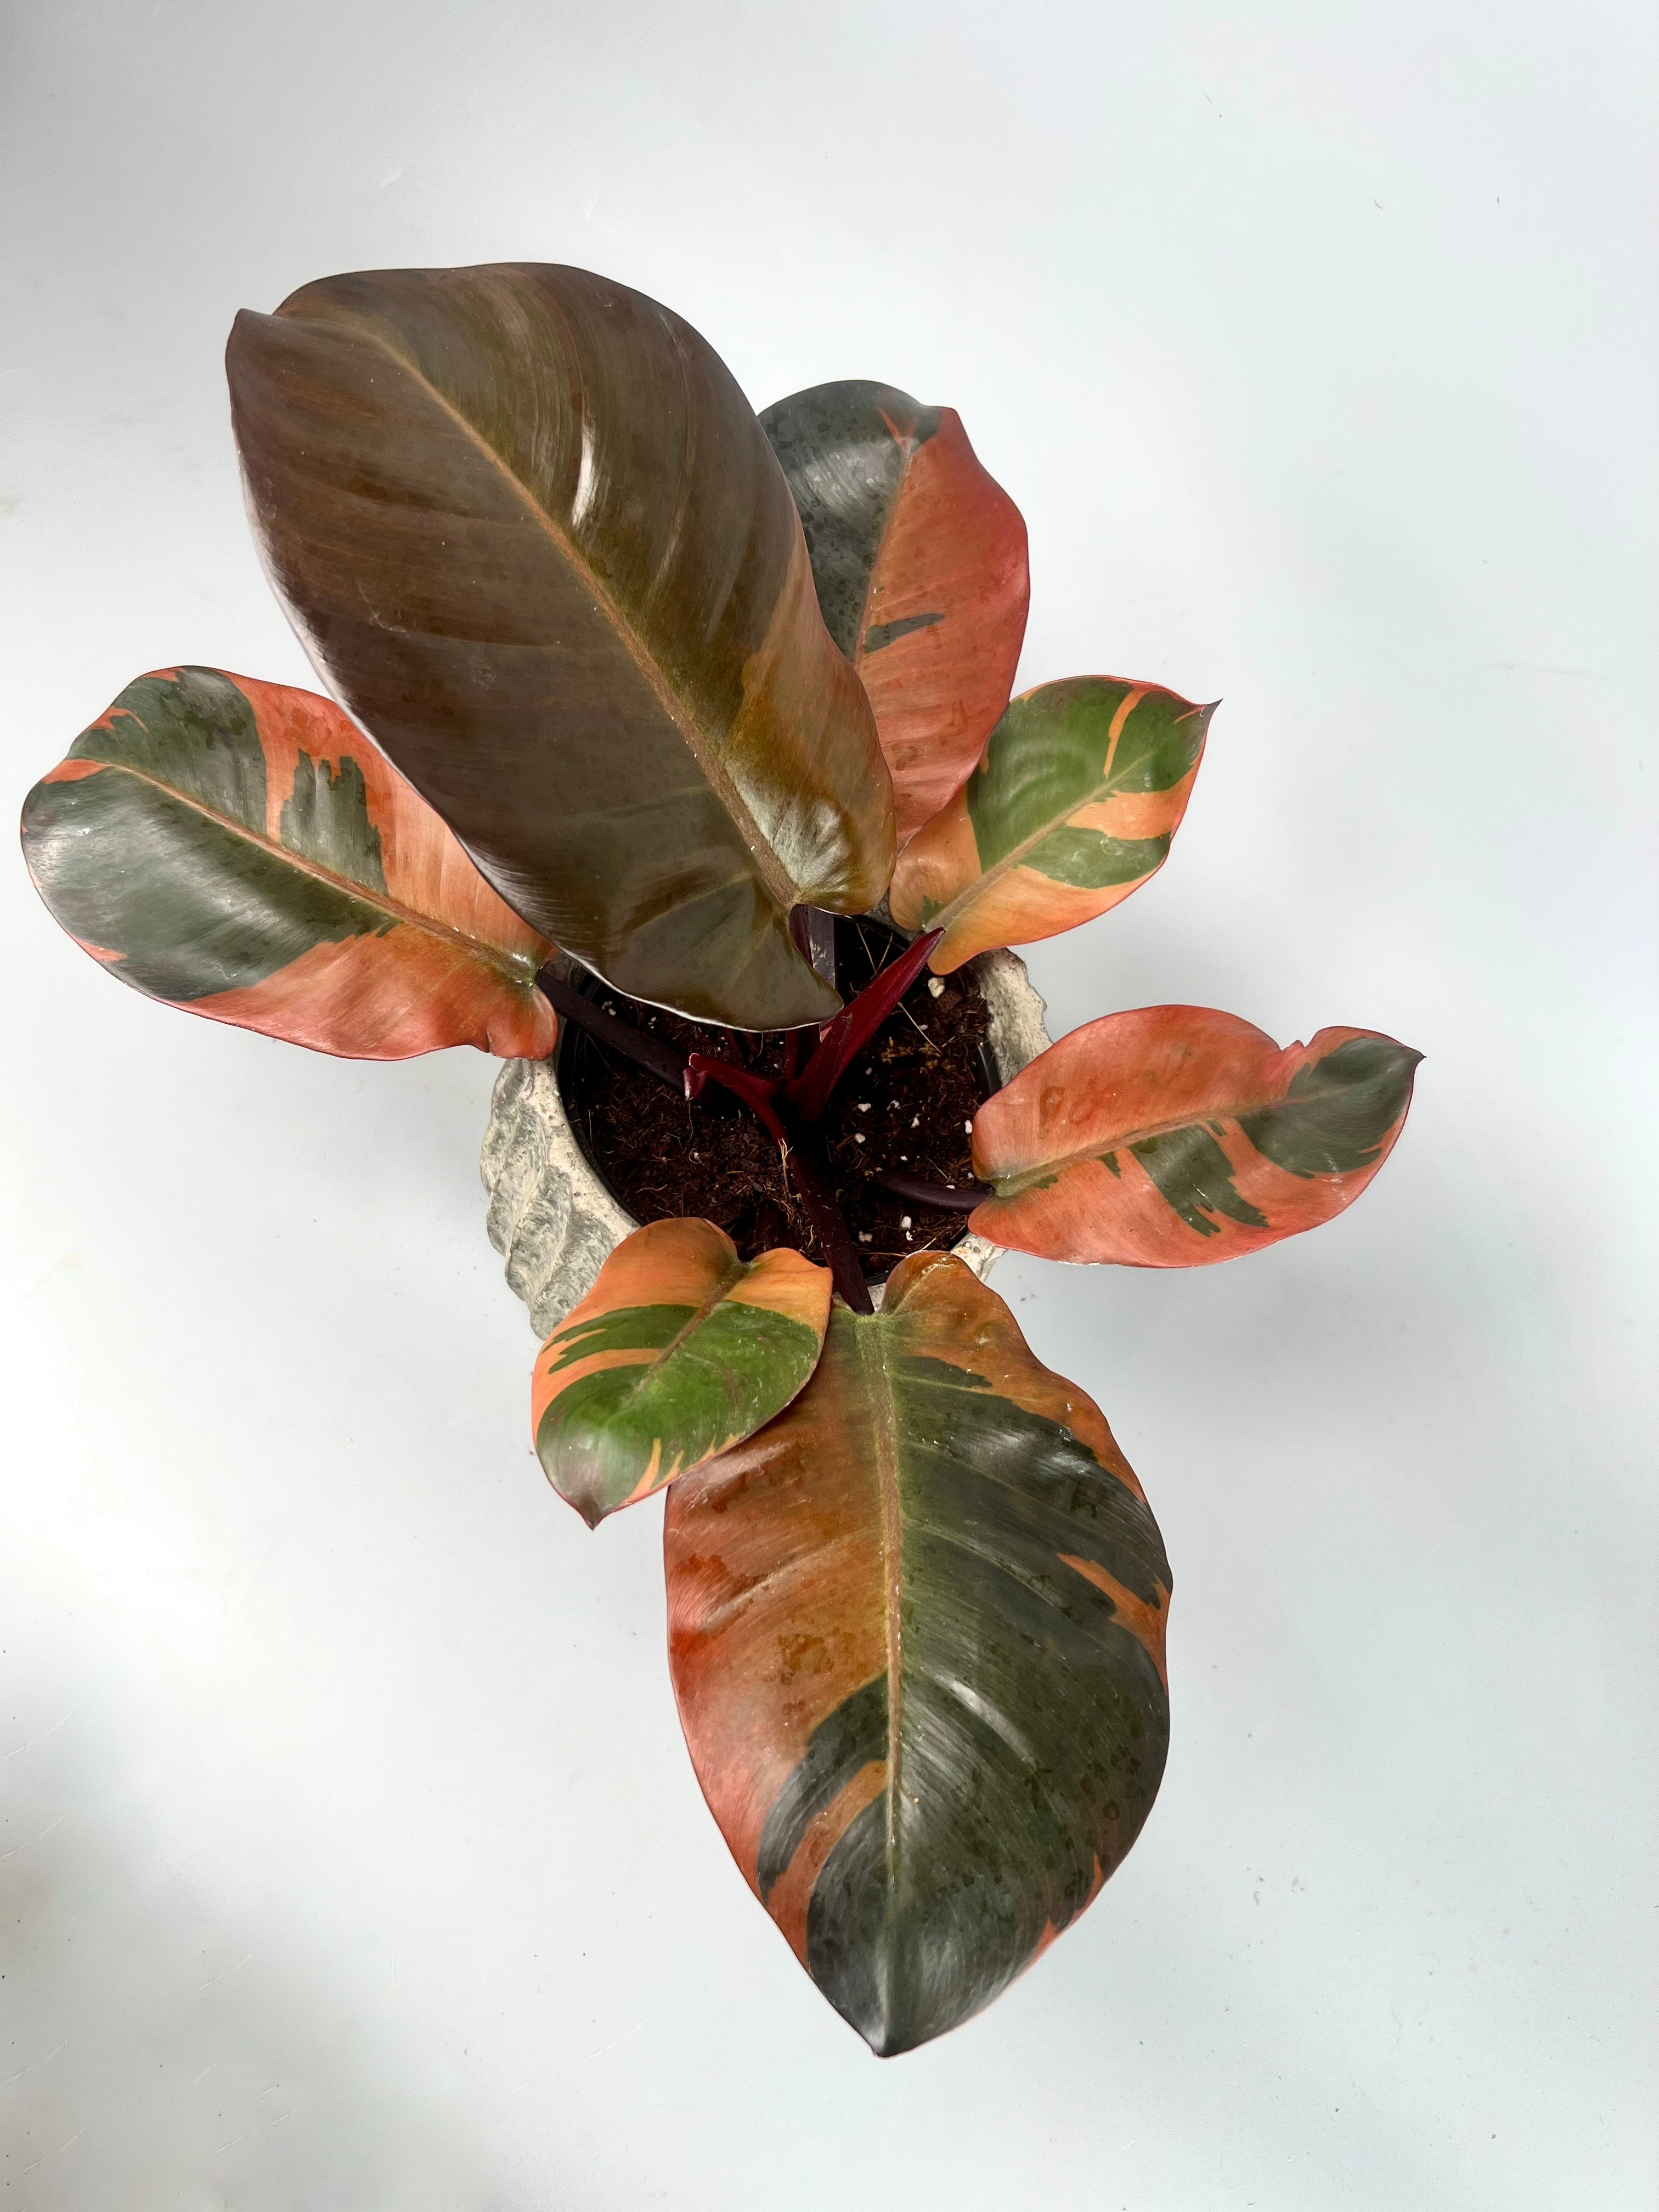 Philodendron "Black Cardinal" Variegated